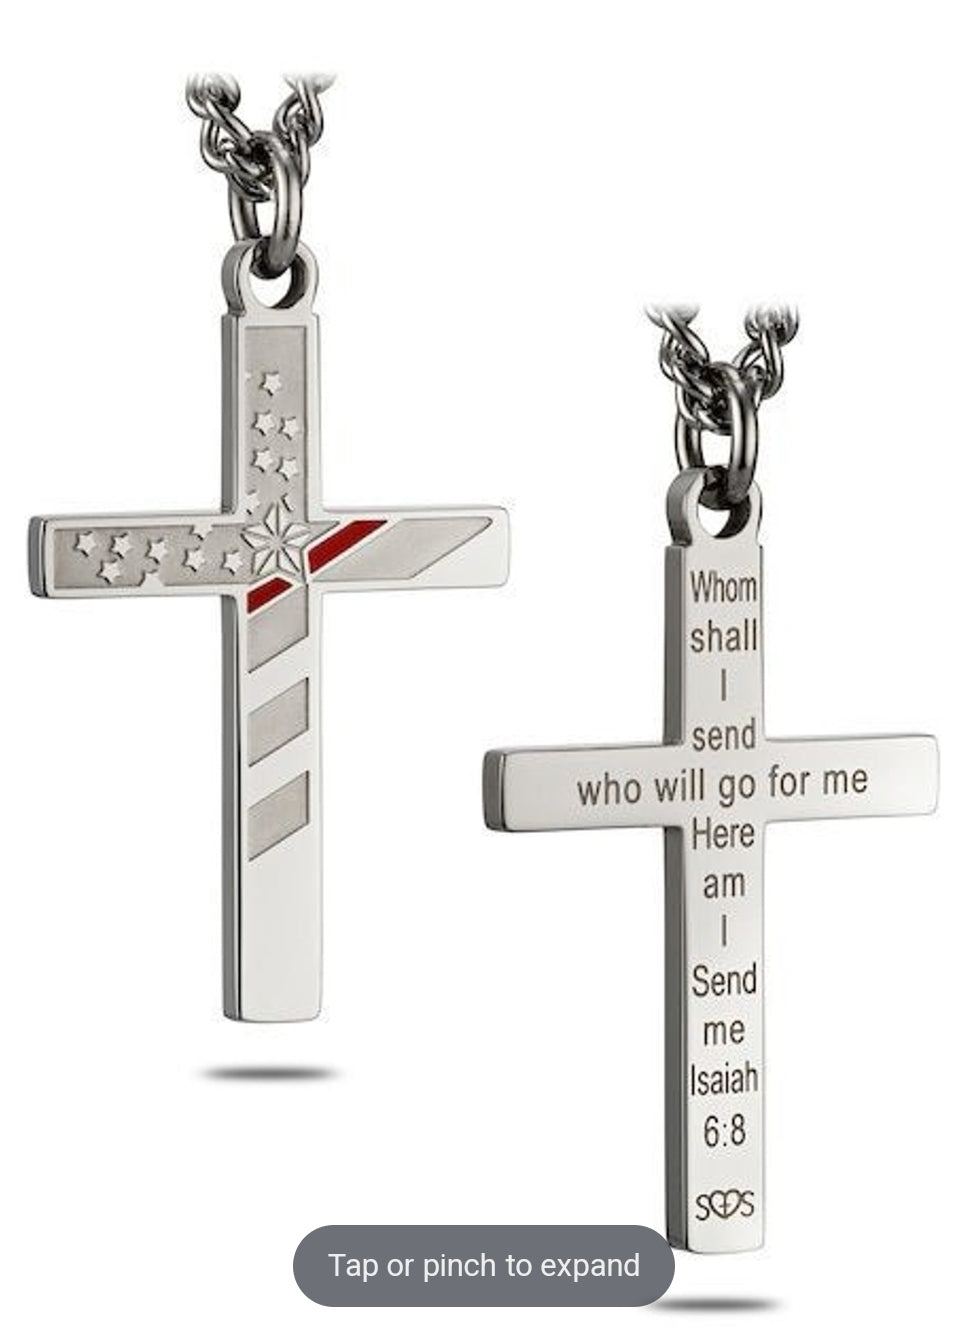 Shields of Strength Men's Stainless Steel Firefighter Flag Cross with Thin Red Line Necklace Inscribed with Isaiah 6:8 Bible Verse - - The Tool Store